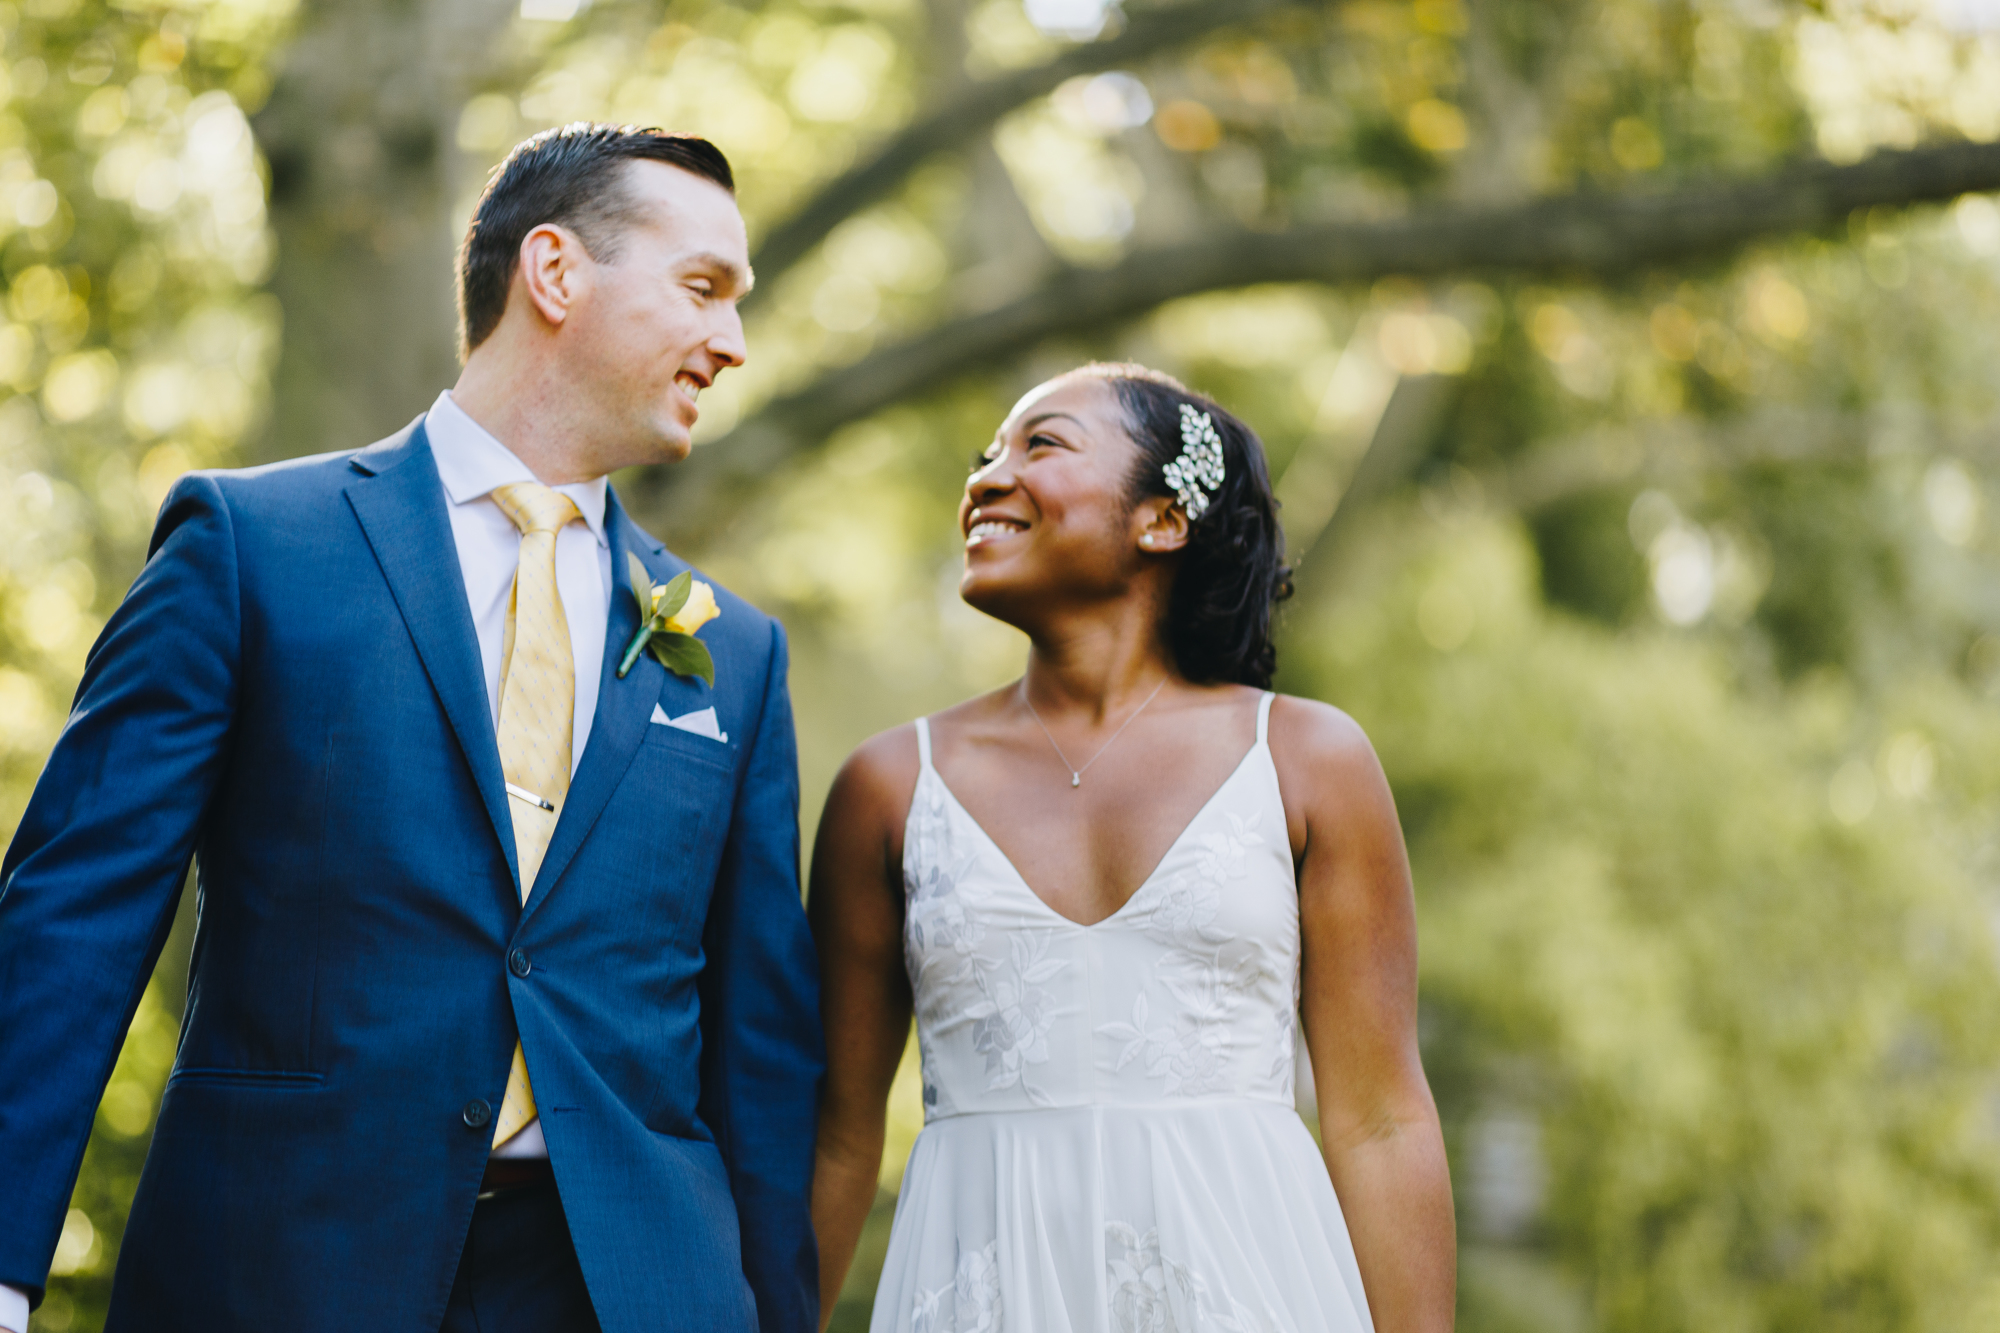 Spring Central Park Elopement Photos in New York